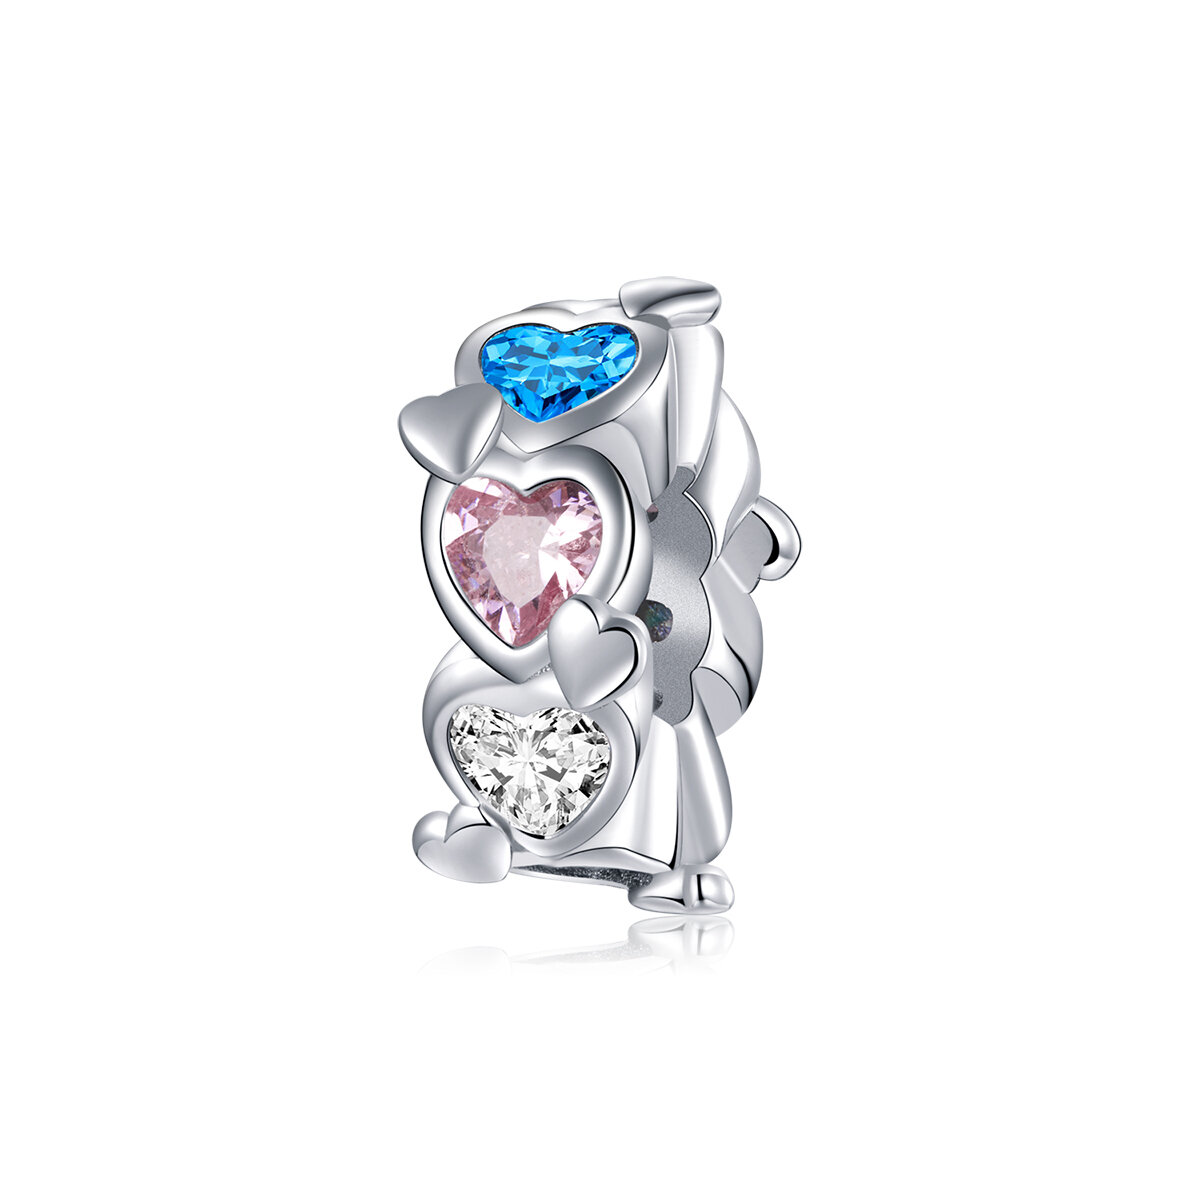 GemKing BSC408 Heart with heart S925 Sterling Silver Charm